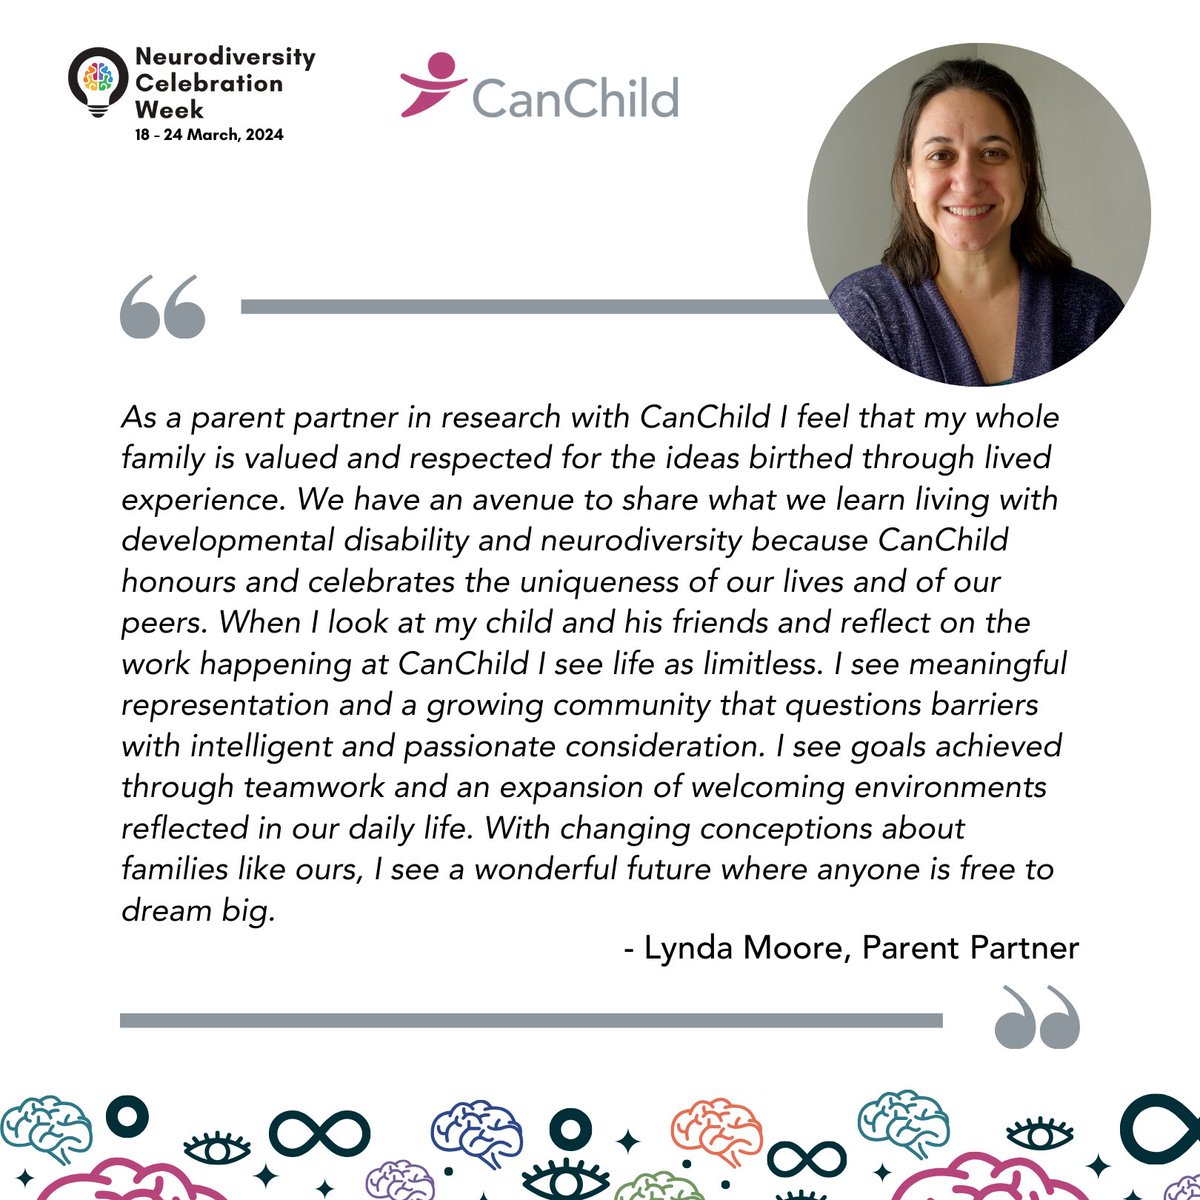 Day 4 of #NeurodiversityCelebrationWeek: Lynda’s journey with #CanChild illuminates a future where neurodiversity is celebrated, barriers are questioned, and everyone is free to dream big.💫 #NCW #ThisIsND #InclusionMatters